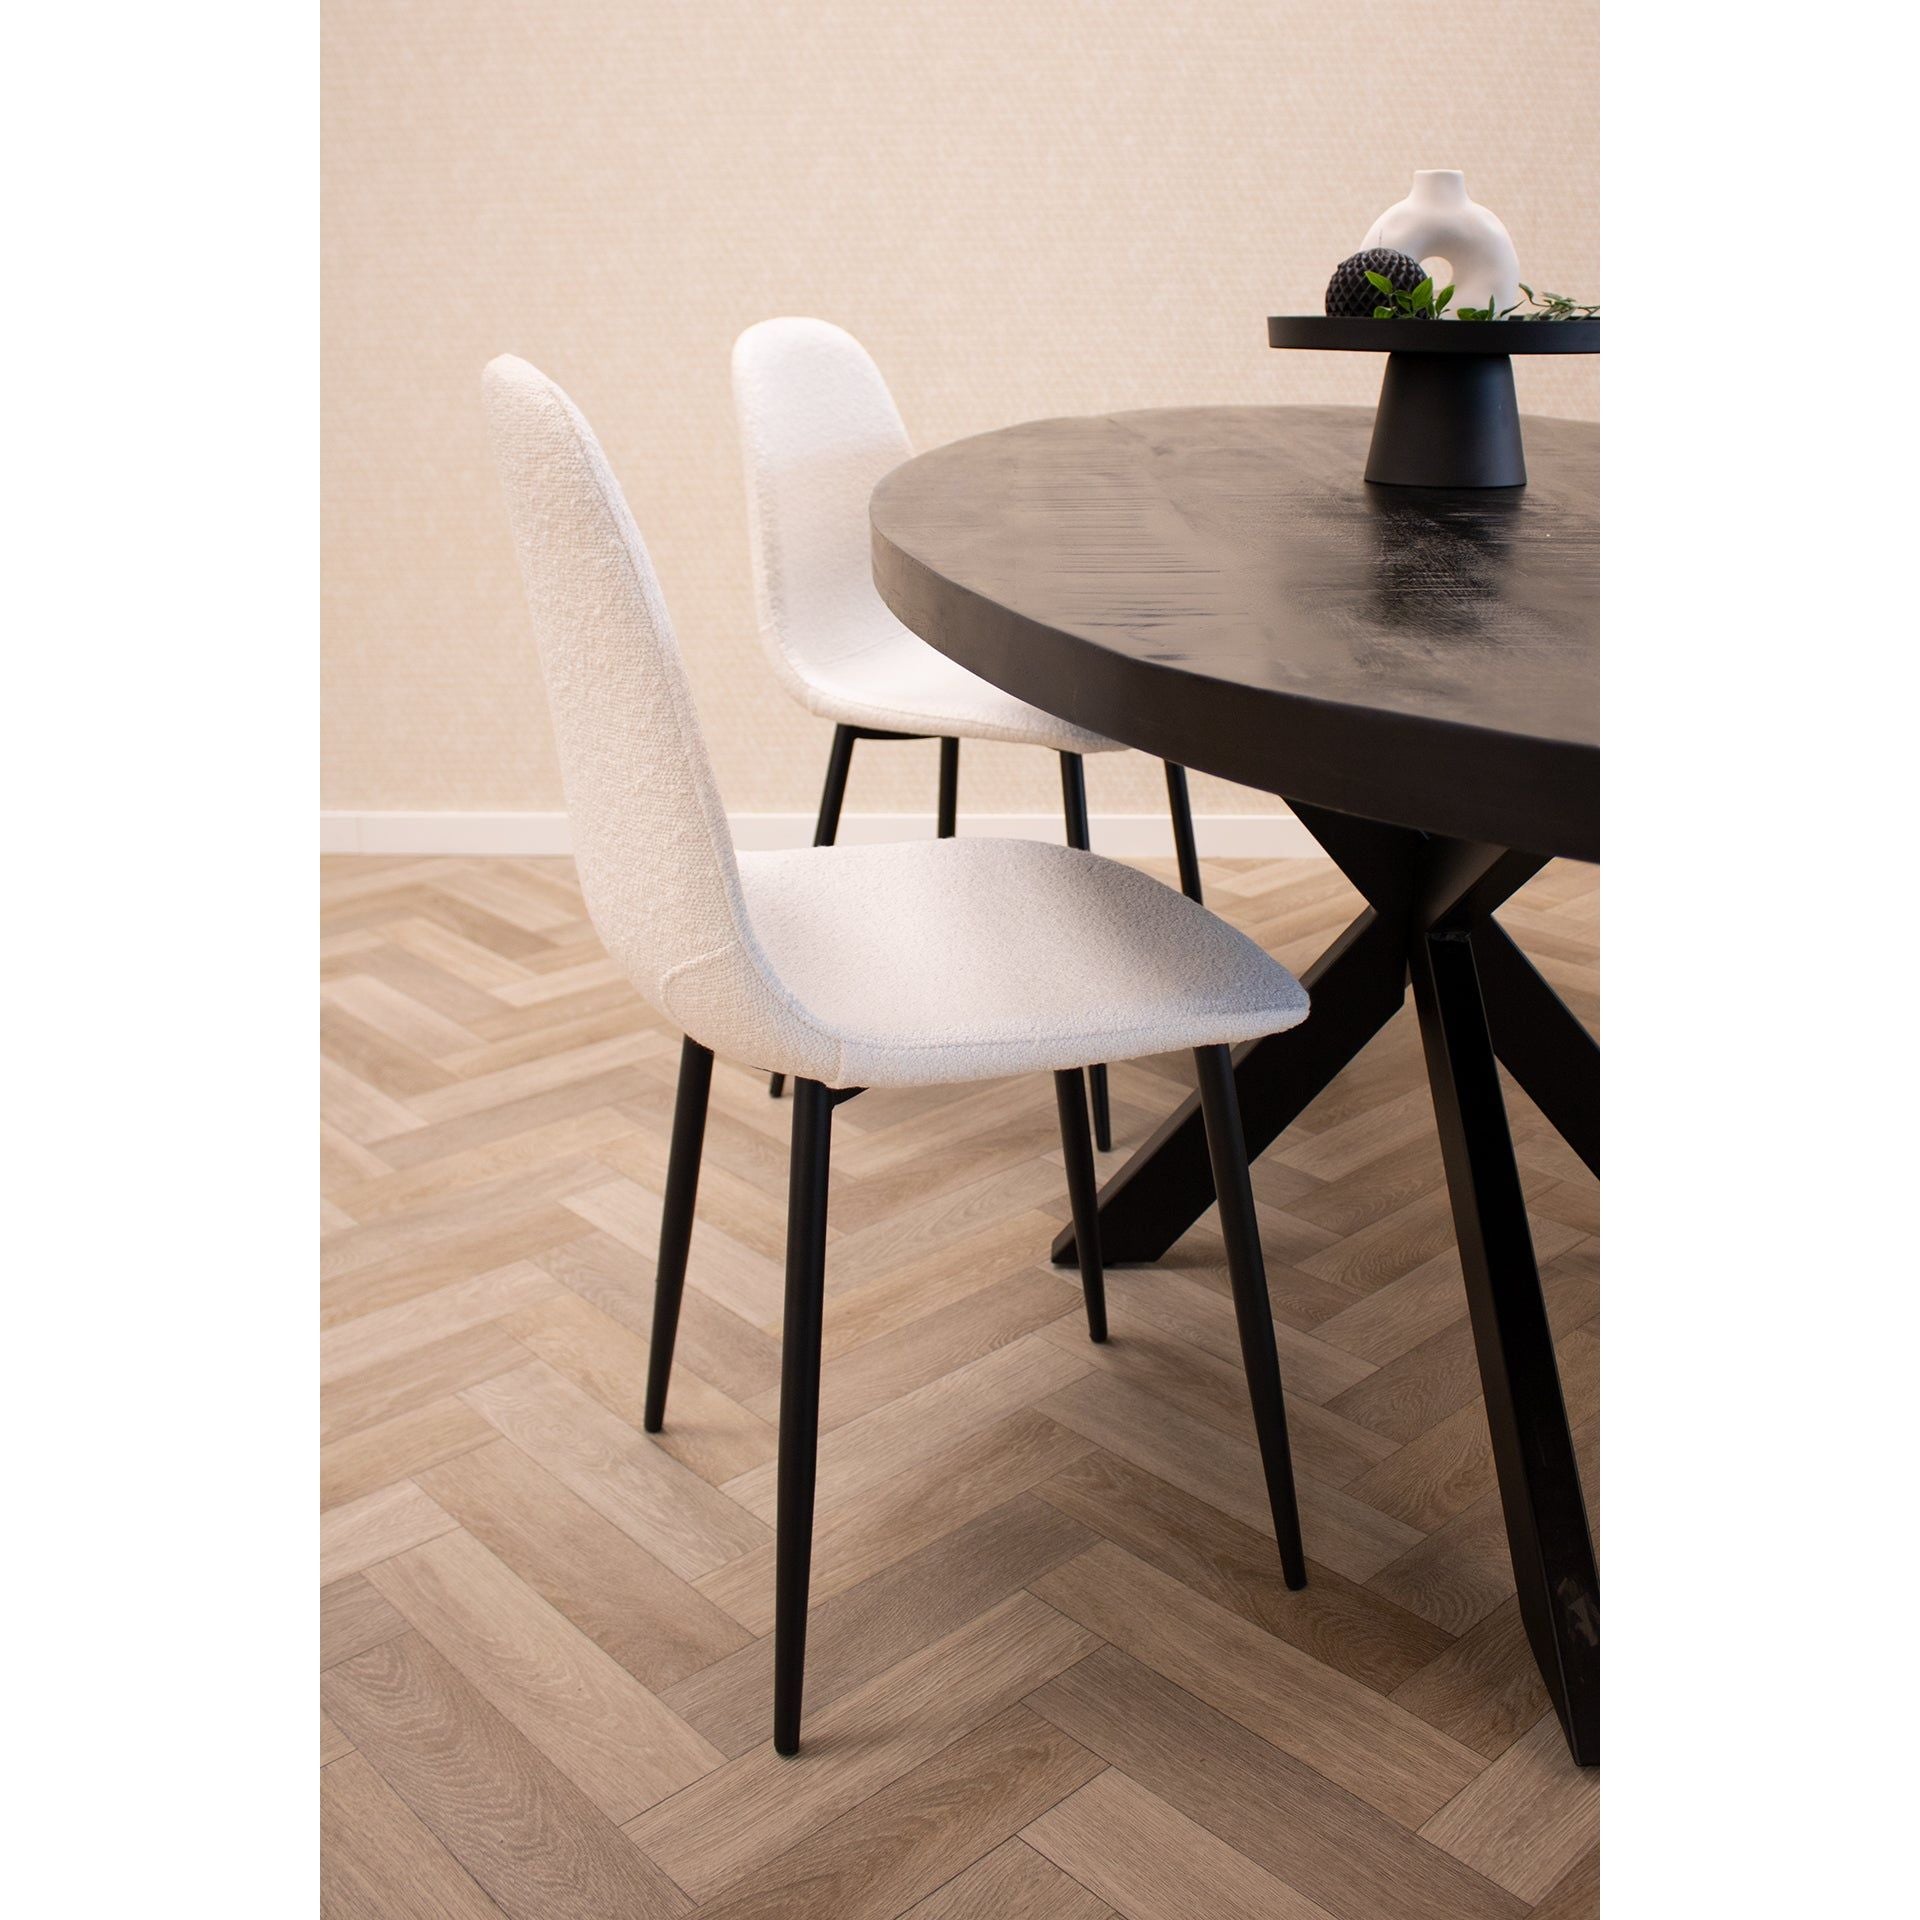 Kick dining room chair Mees